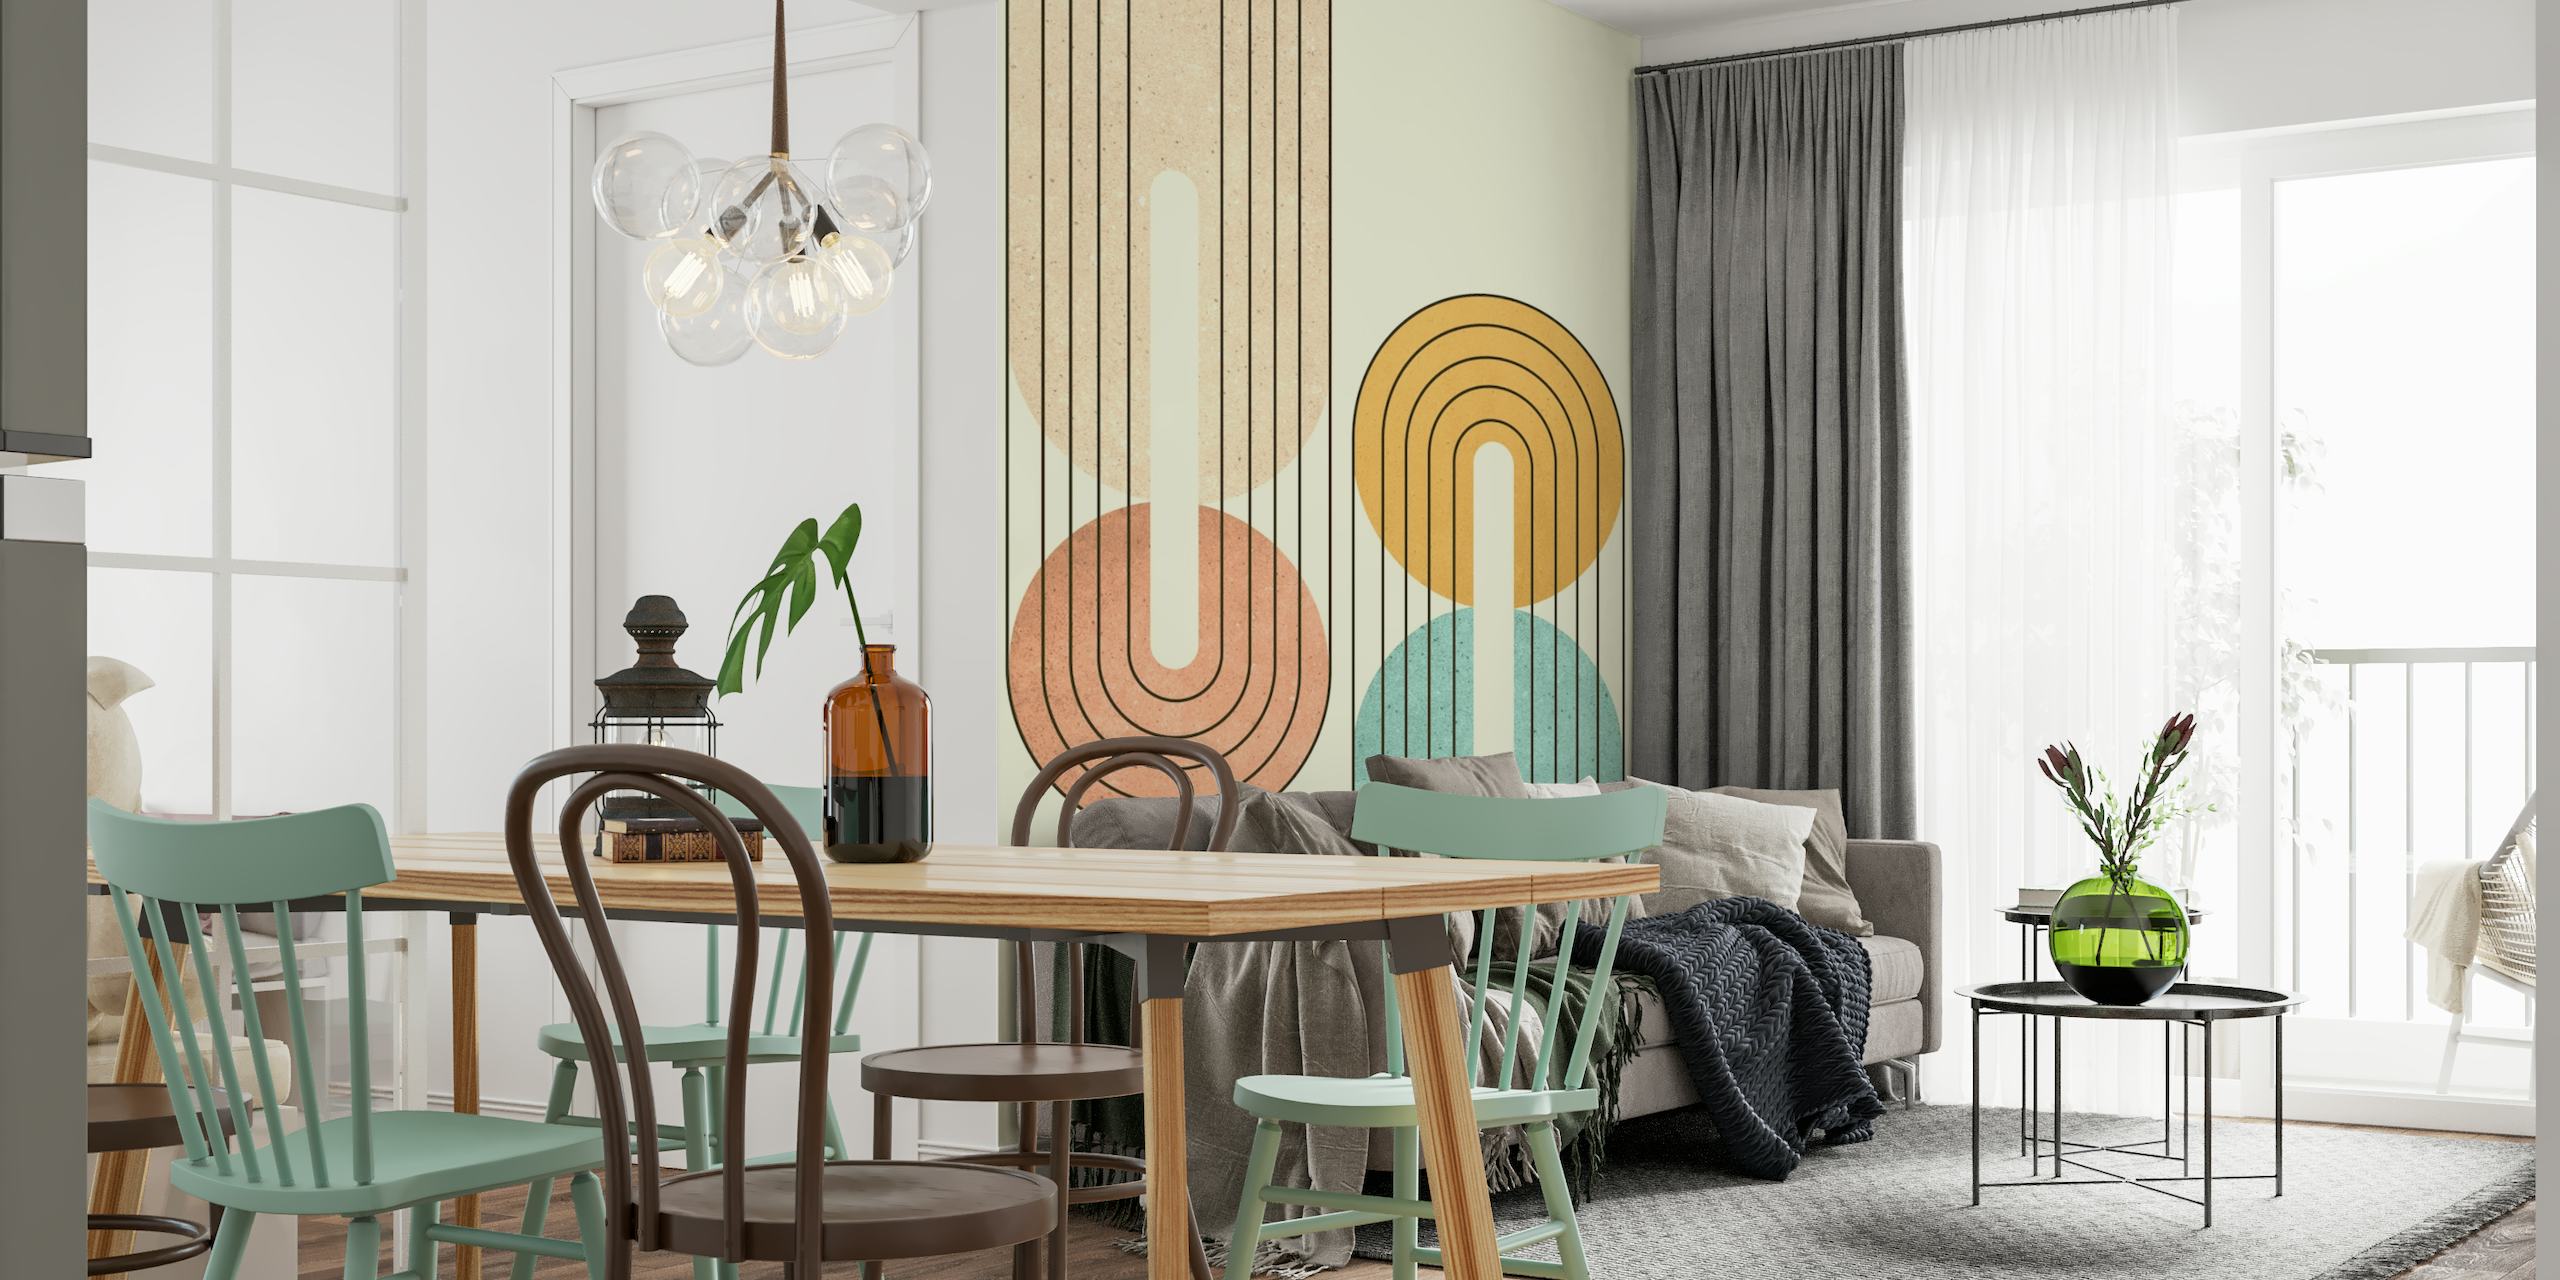 New Century 08 abstract geometric wall mural with pastel colors